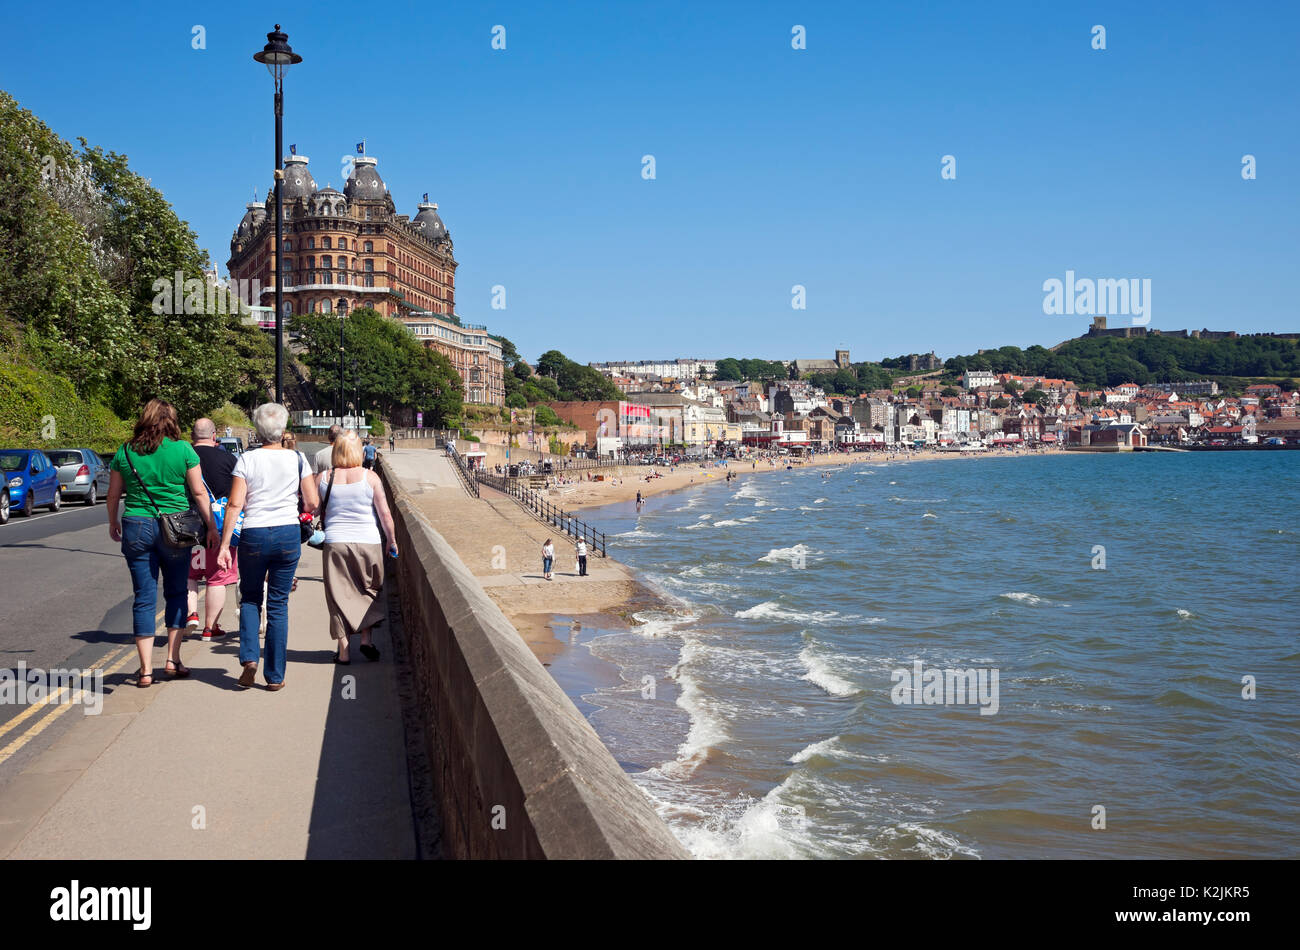 People tourists visitors walking along the seafront in summer Scarborough South Bay North Yorkshire England UK United Kingdom GB Great Britain Stock Photo